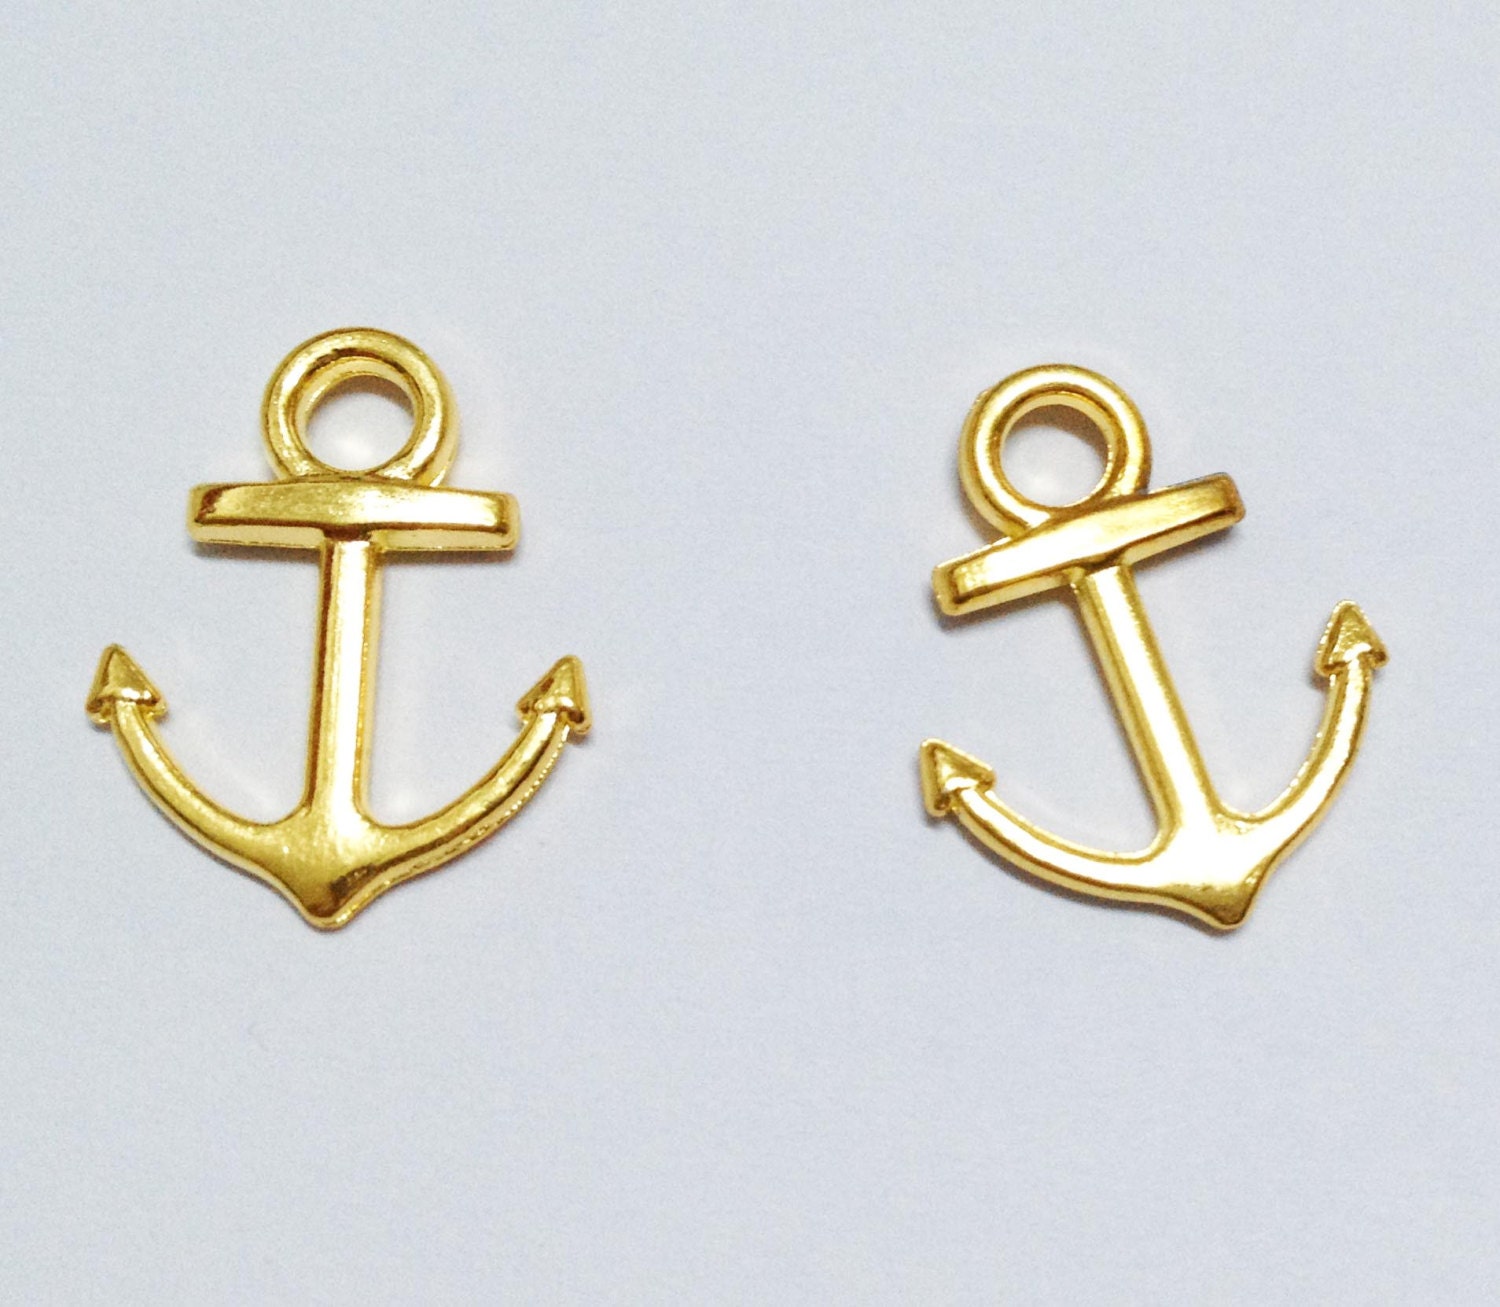 Anchor charms 25pcs Gold Plated Anchor Charm Pendants 15x18mm